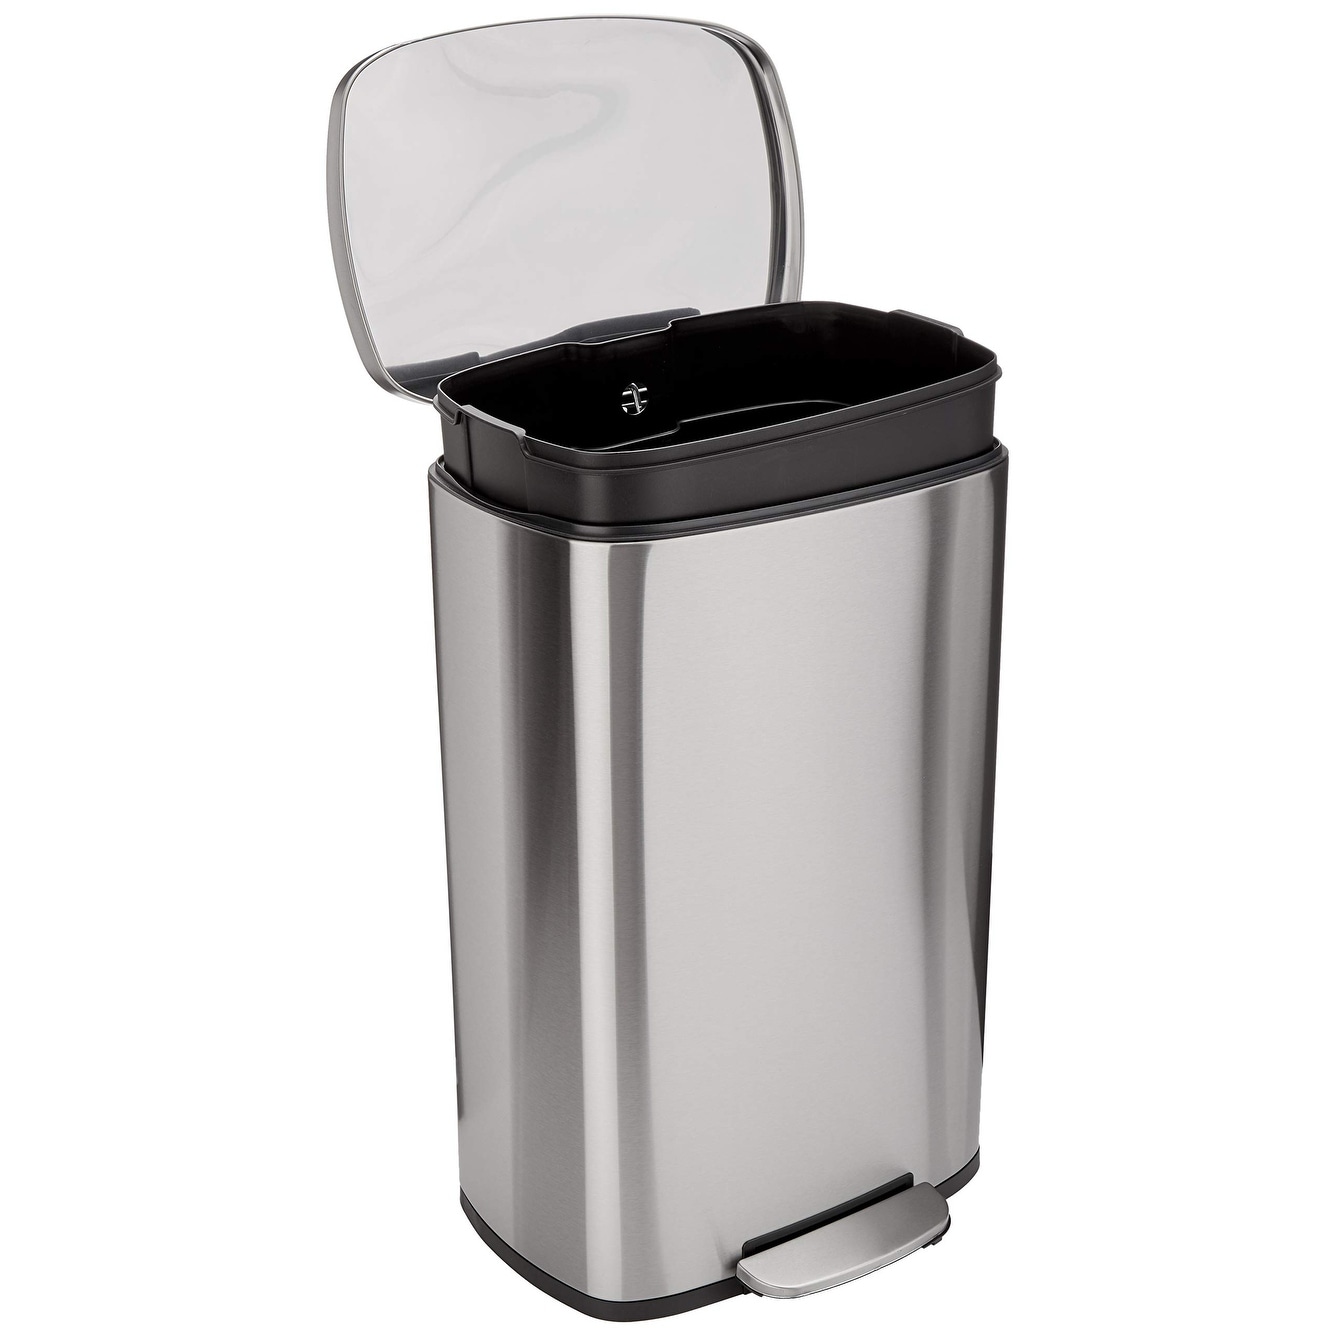 https://ak1.ostkcdn.com/images/products/is/images/direct/ebfc6900b513262f7f9c32545260229eb2afa6a5/1Pc-Rectangular-Trash-Can-With-Soft-Close-Foot-Pedal%2C-Stainless-Steel%2C-50-Liter-13.2%2C-12-Liter-3.1-Gallon%2C-30-Liter-7.9-Gallon.jpg